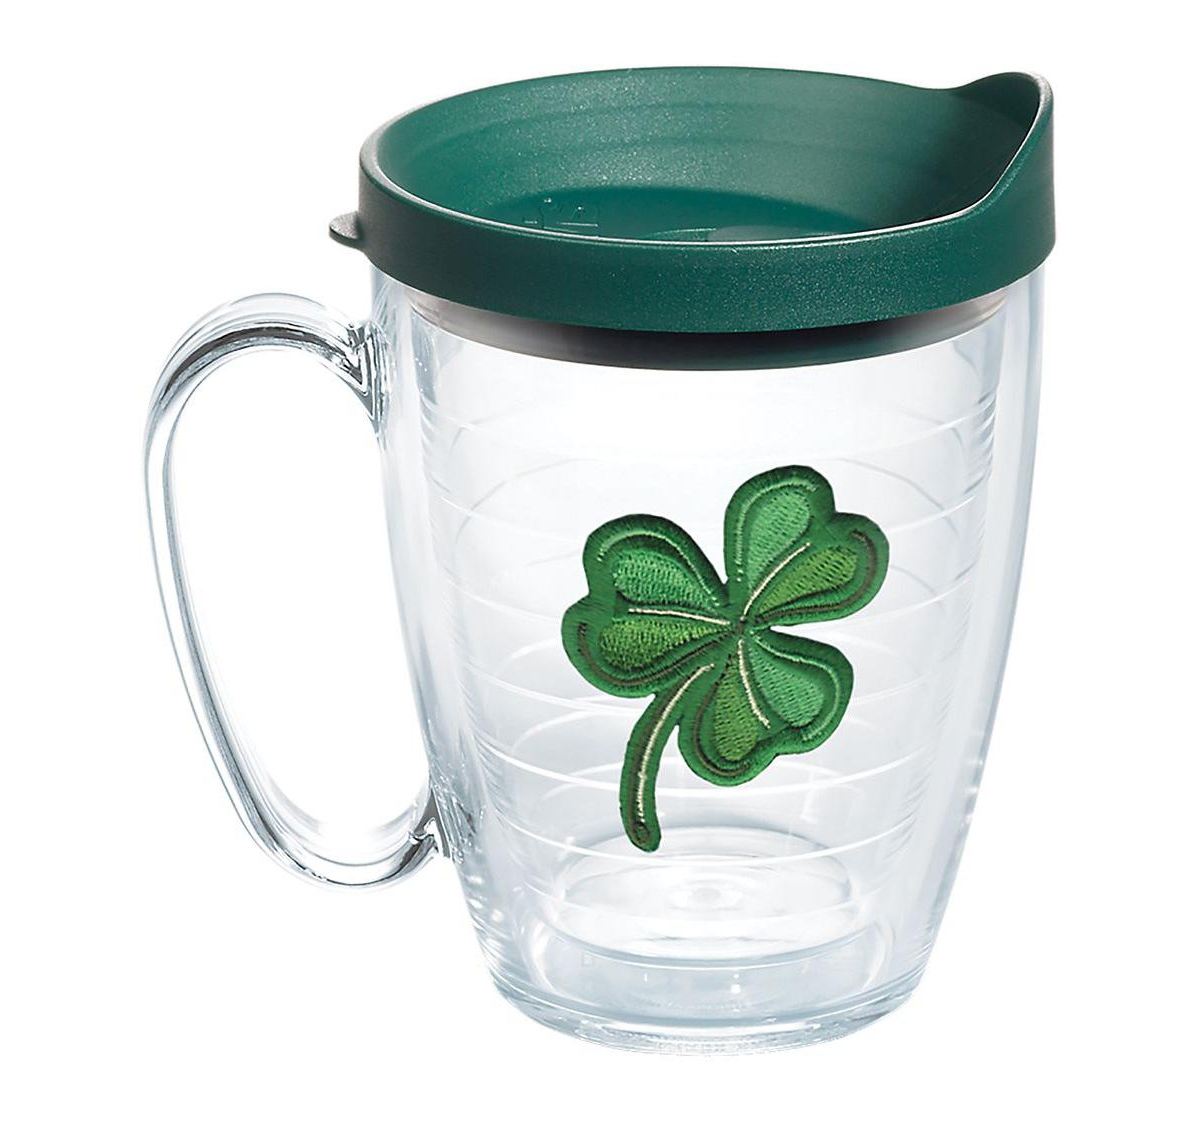 Tervis Tumbler Tervis Shamrock Made In Usa Double Walled Insulated Tumbler Travel Cup Keeps Drinks Cold & Hot, 16oz In Open Miscellaneous